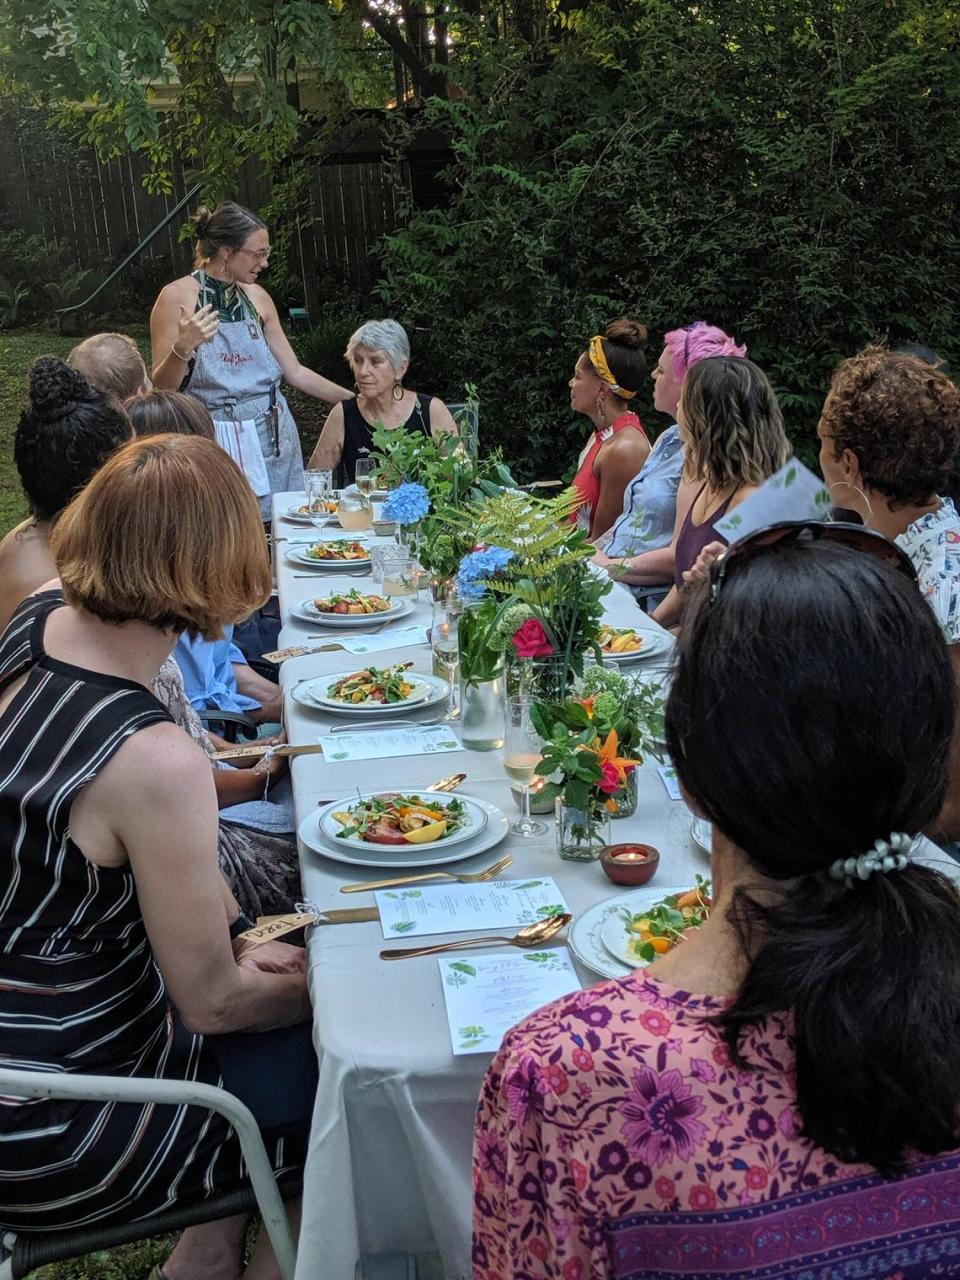 This, says Jess Masanotti (pictured standing), was her very first Mortar & Pestle dinner, hosted by her friend Linda Minor (seated at the table’s head) at her home in Charlotte’s Elizabeth neighborhood. Partnering with Kriska Woods and Manny Carandang of Charlotte Remedy, they curated and created a four-course dinner with signature cocktails and drink pairings. “This was such a special night,” Masanotti says, “one that truly kick-started my journey to becoming a professional chef.”